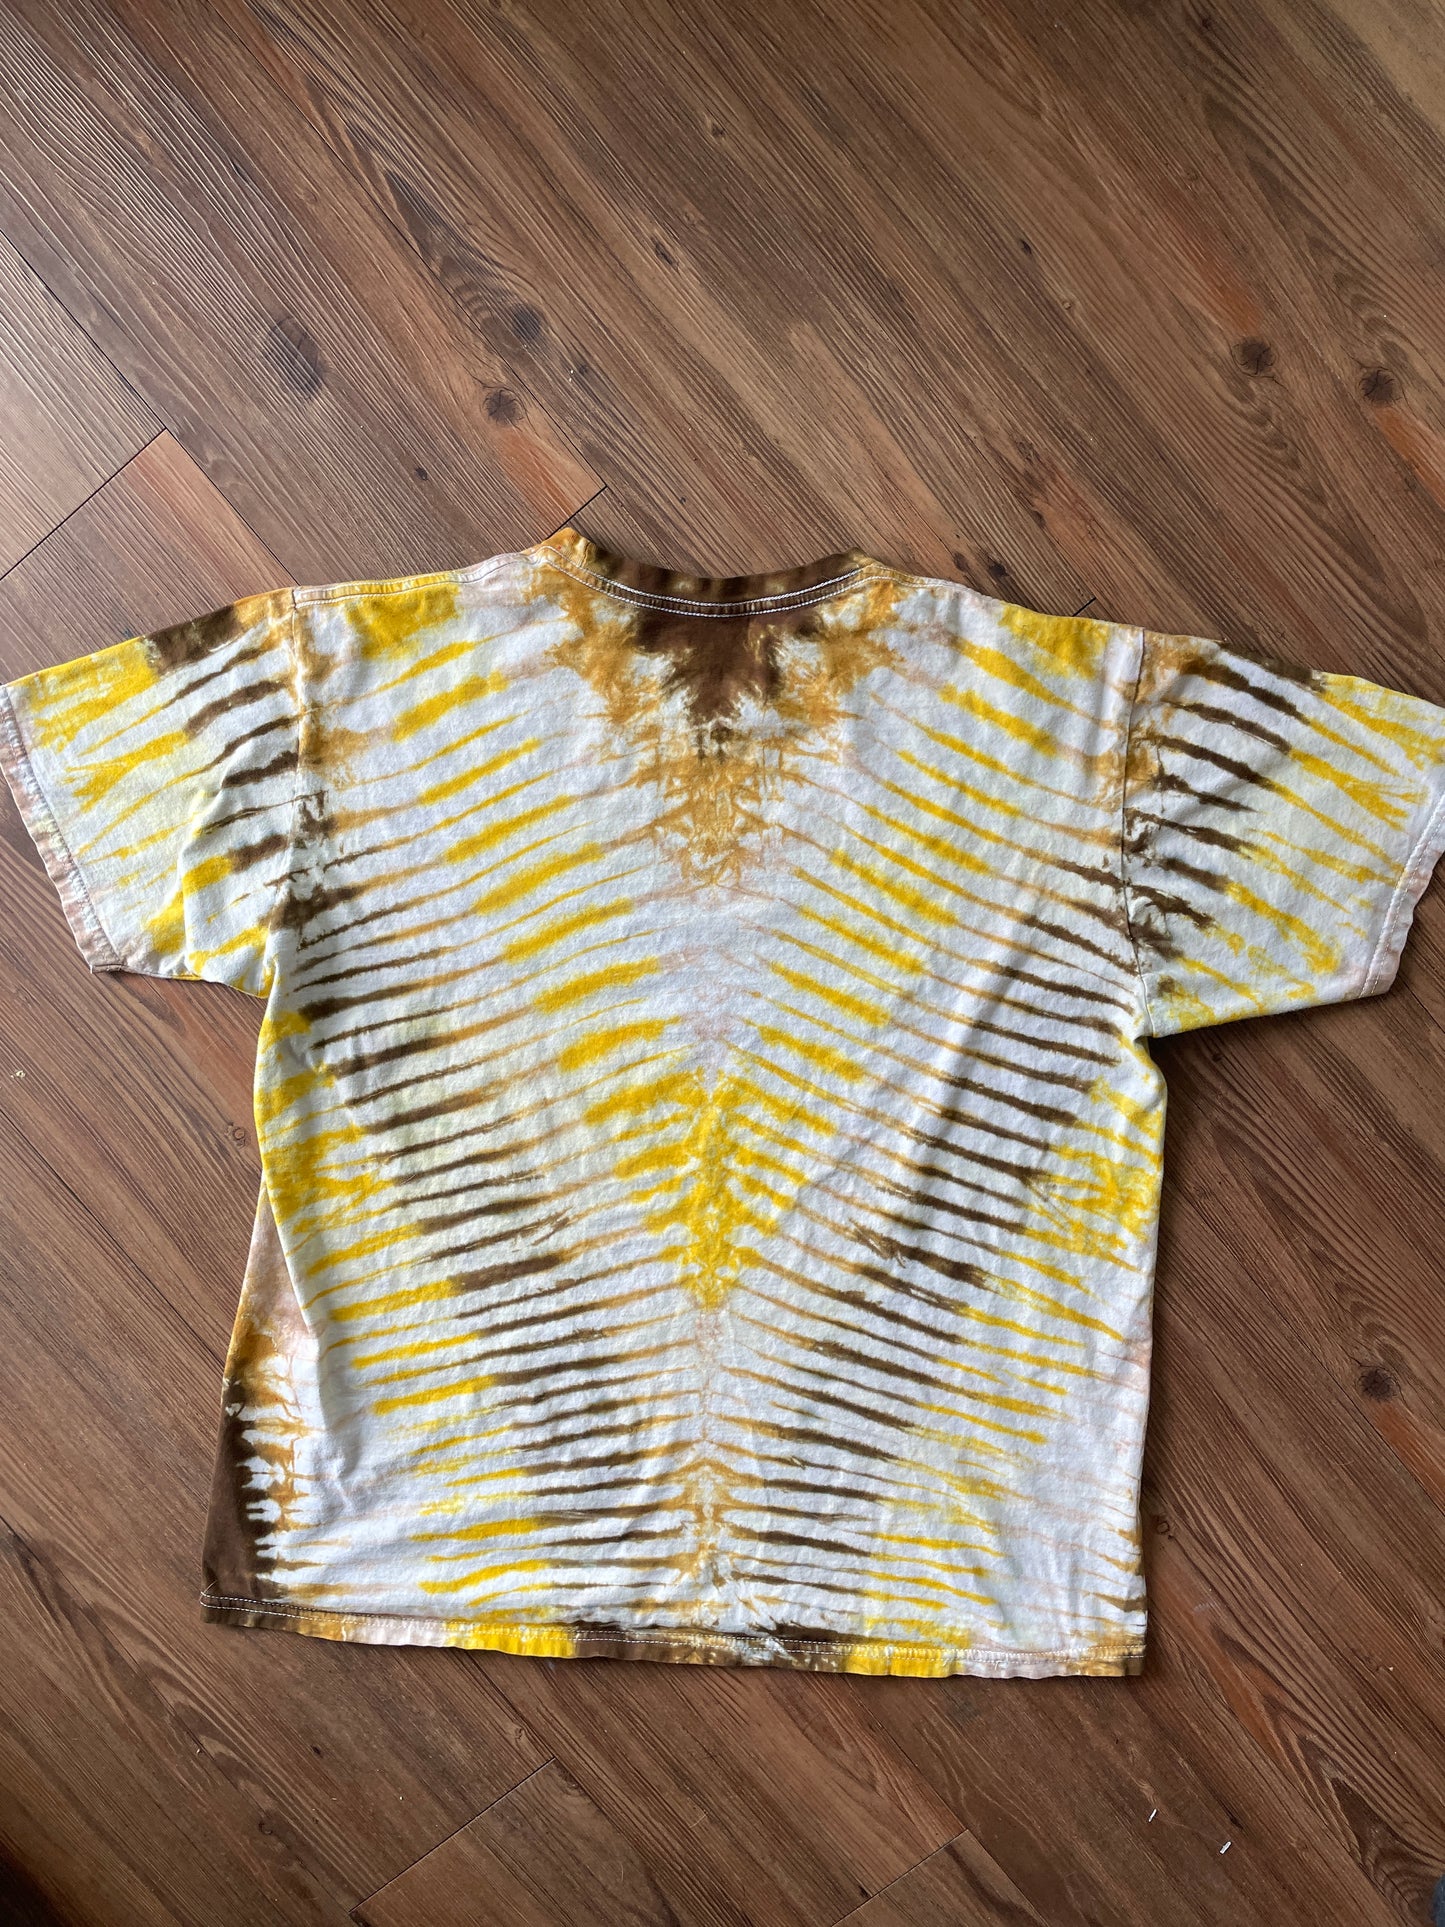 XL Men’s R2-D2 and C3PO Tattooine Handmade Tie Dye T-Shirt | Star Wars Yellow and Brown Short Sleeve